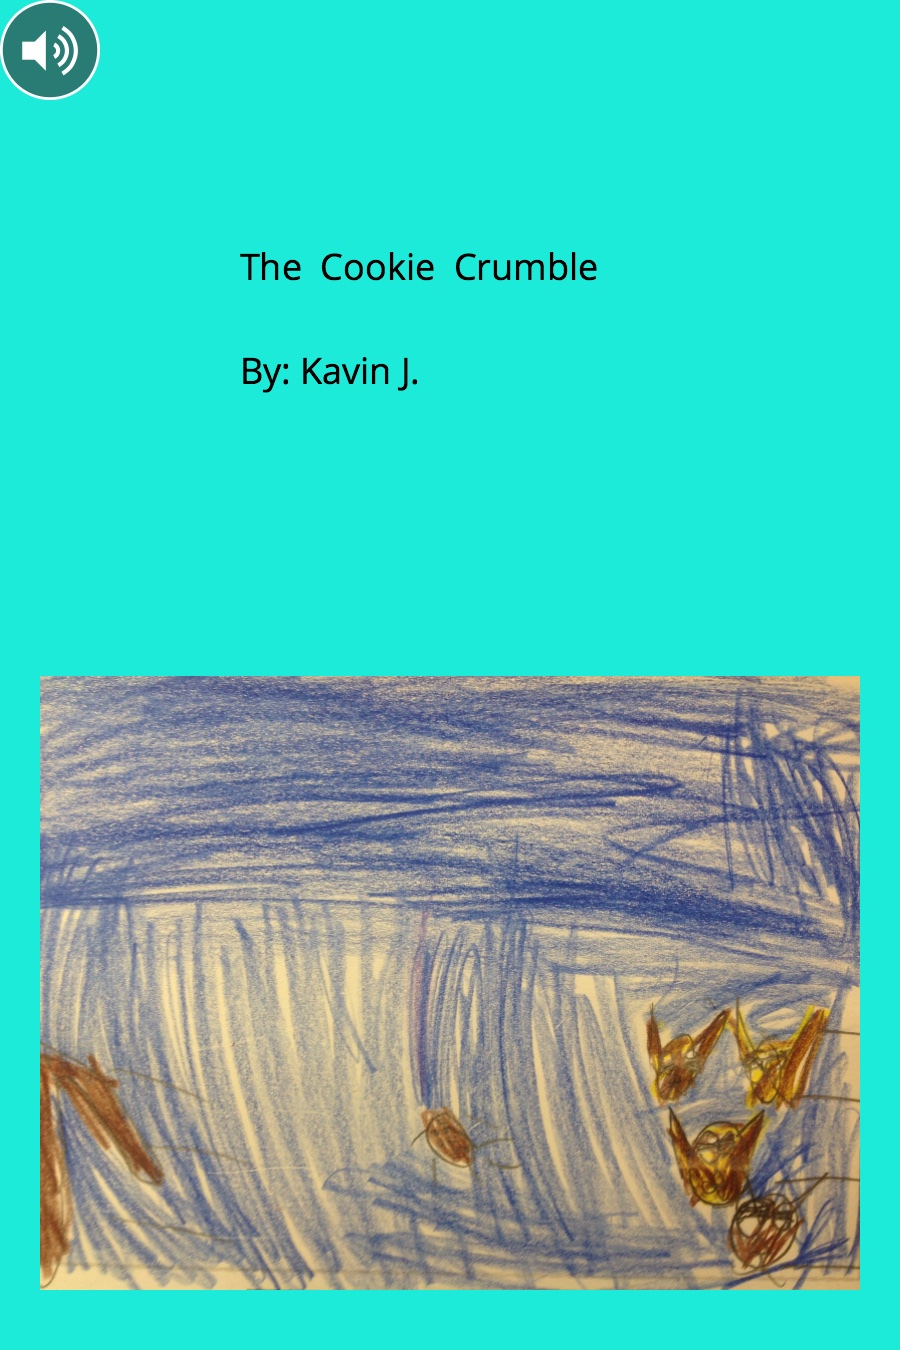 The Cookie Crumble by Kavin J